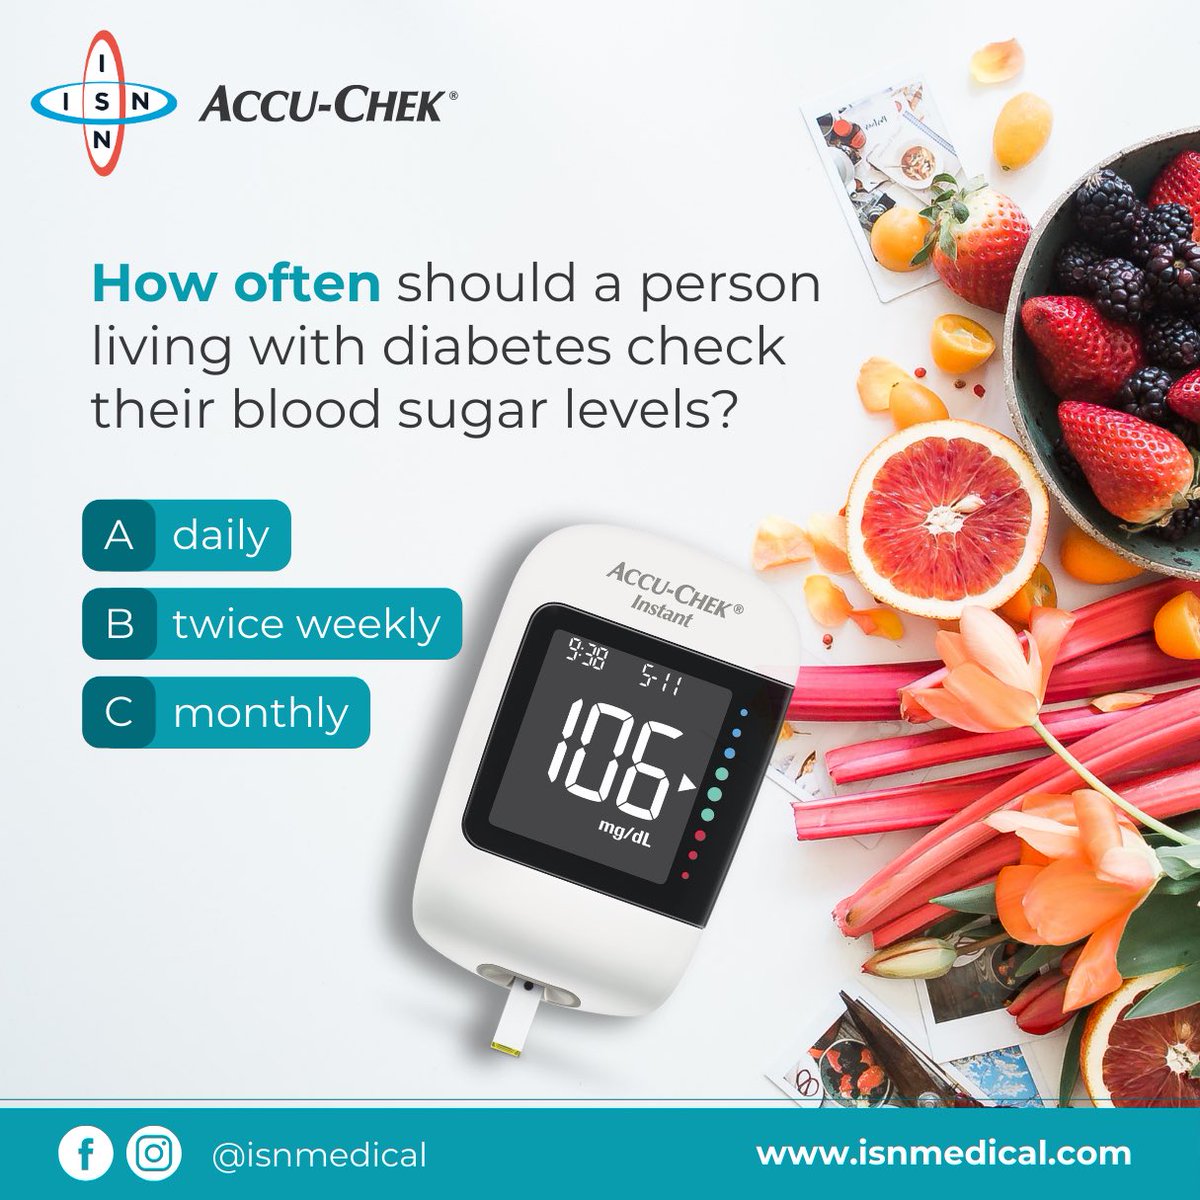 Let us know what you think. Share your thoughts in the comments below! 👇  

#diabetescontrol #diabetescare